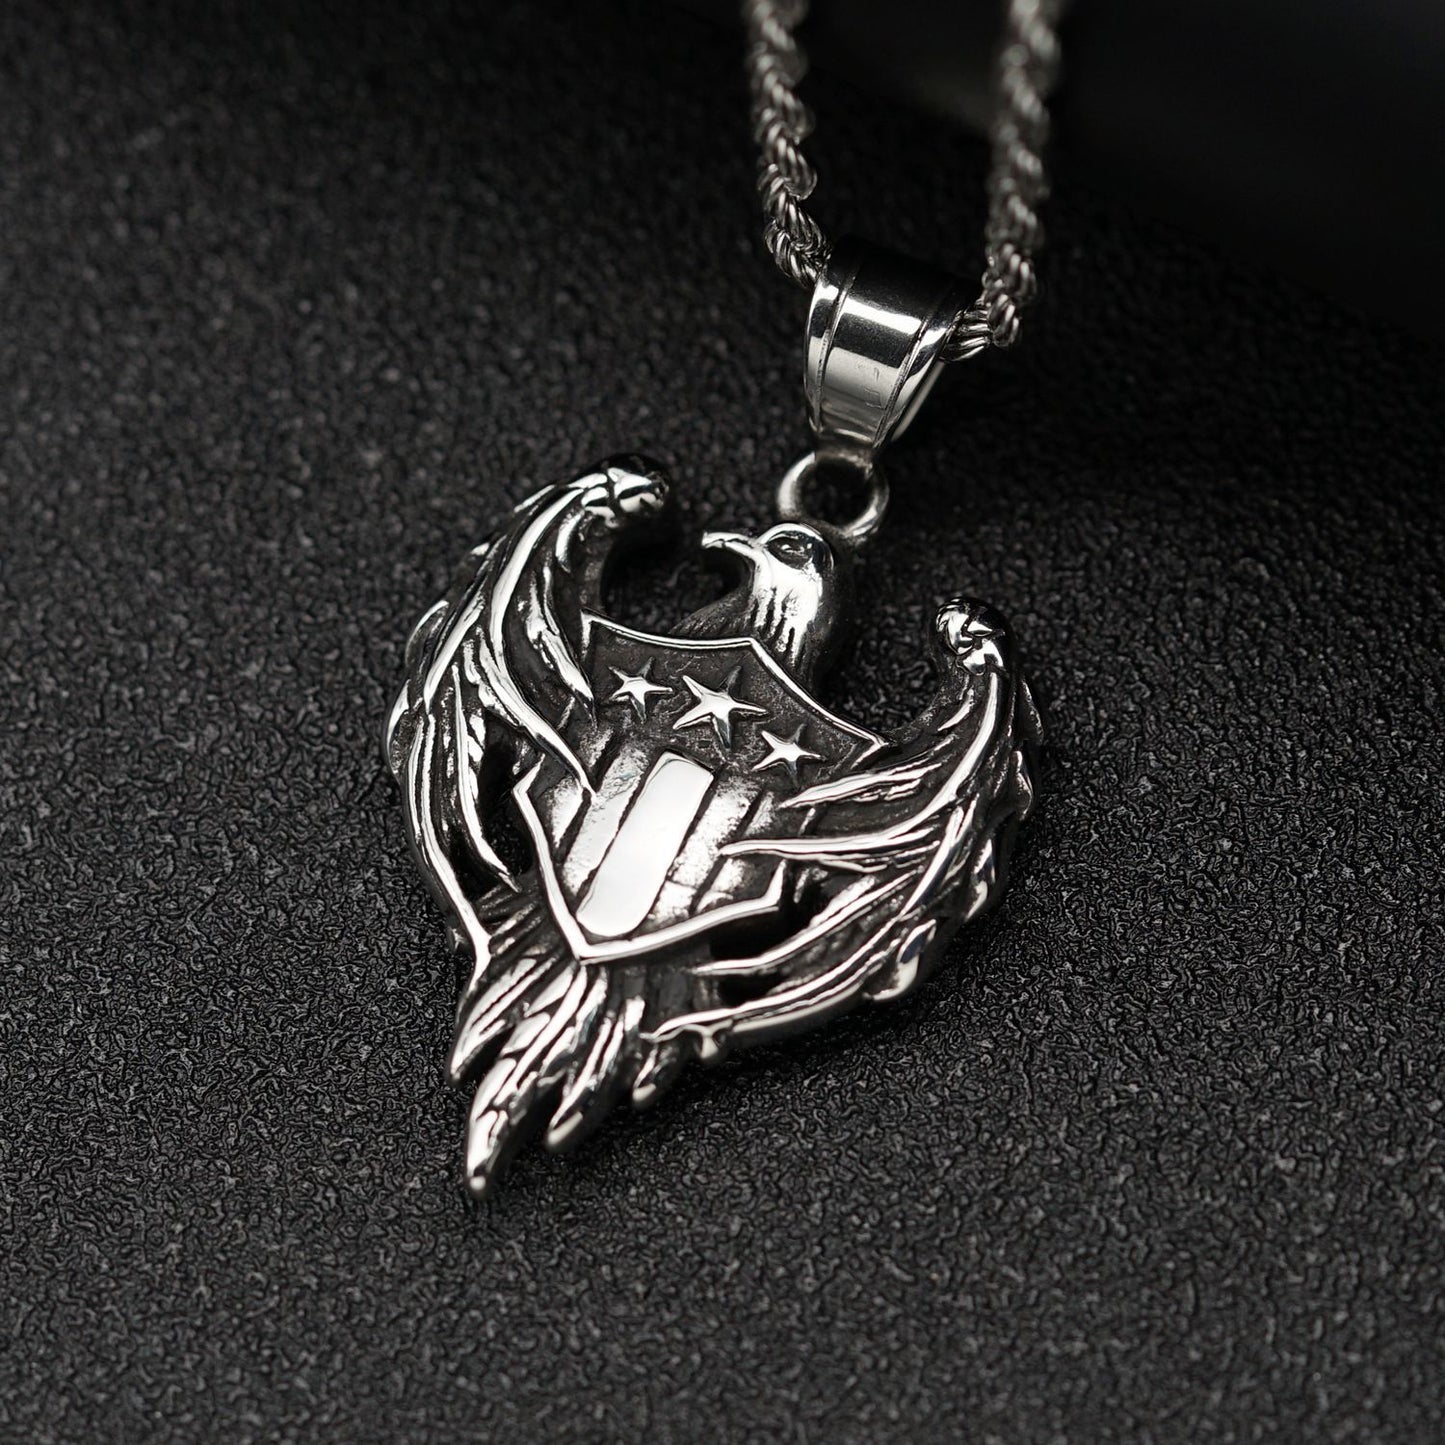 Hot Sale Vintage Shield Eagle Badge Stainless Steel Pendant Personality Domineering Necklace Jewelry Accessories Creative gift